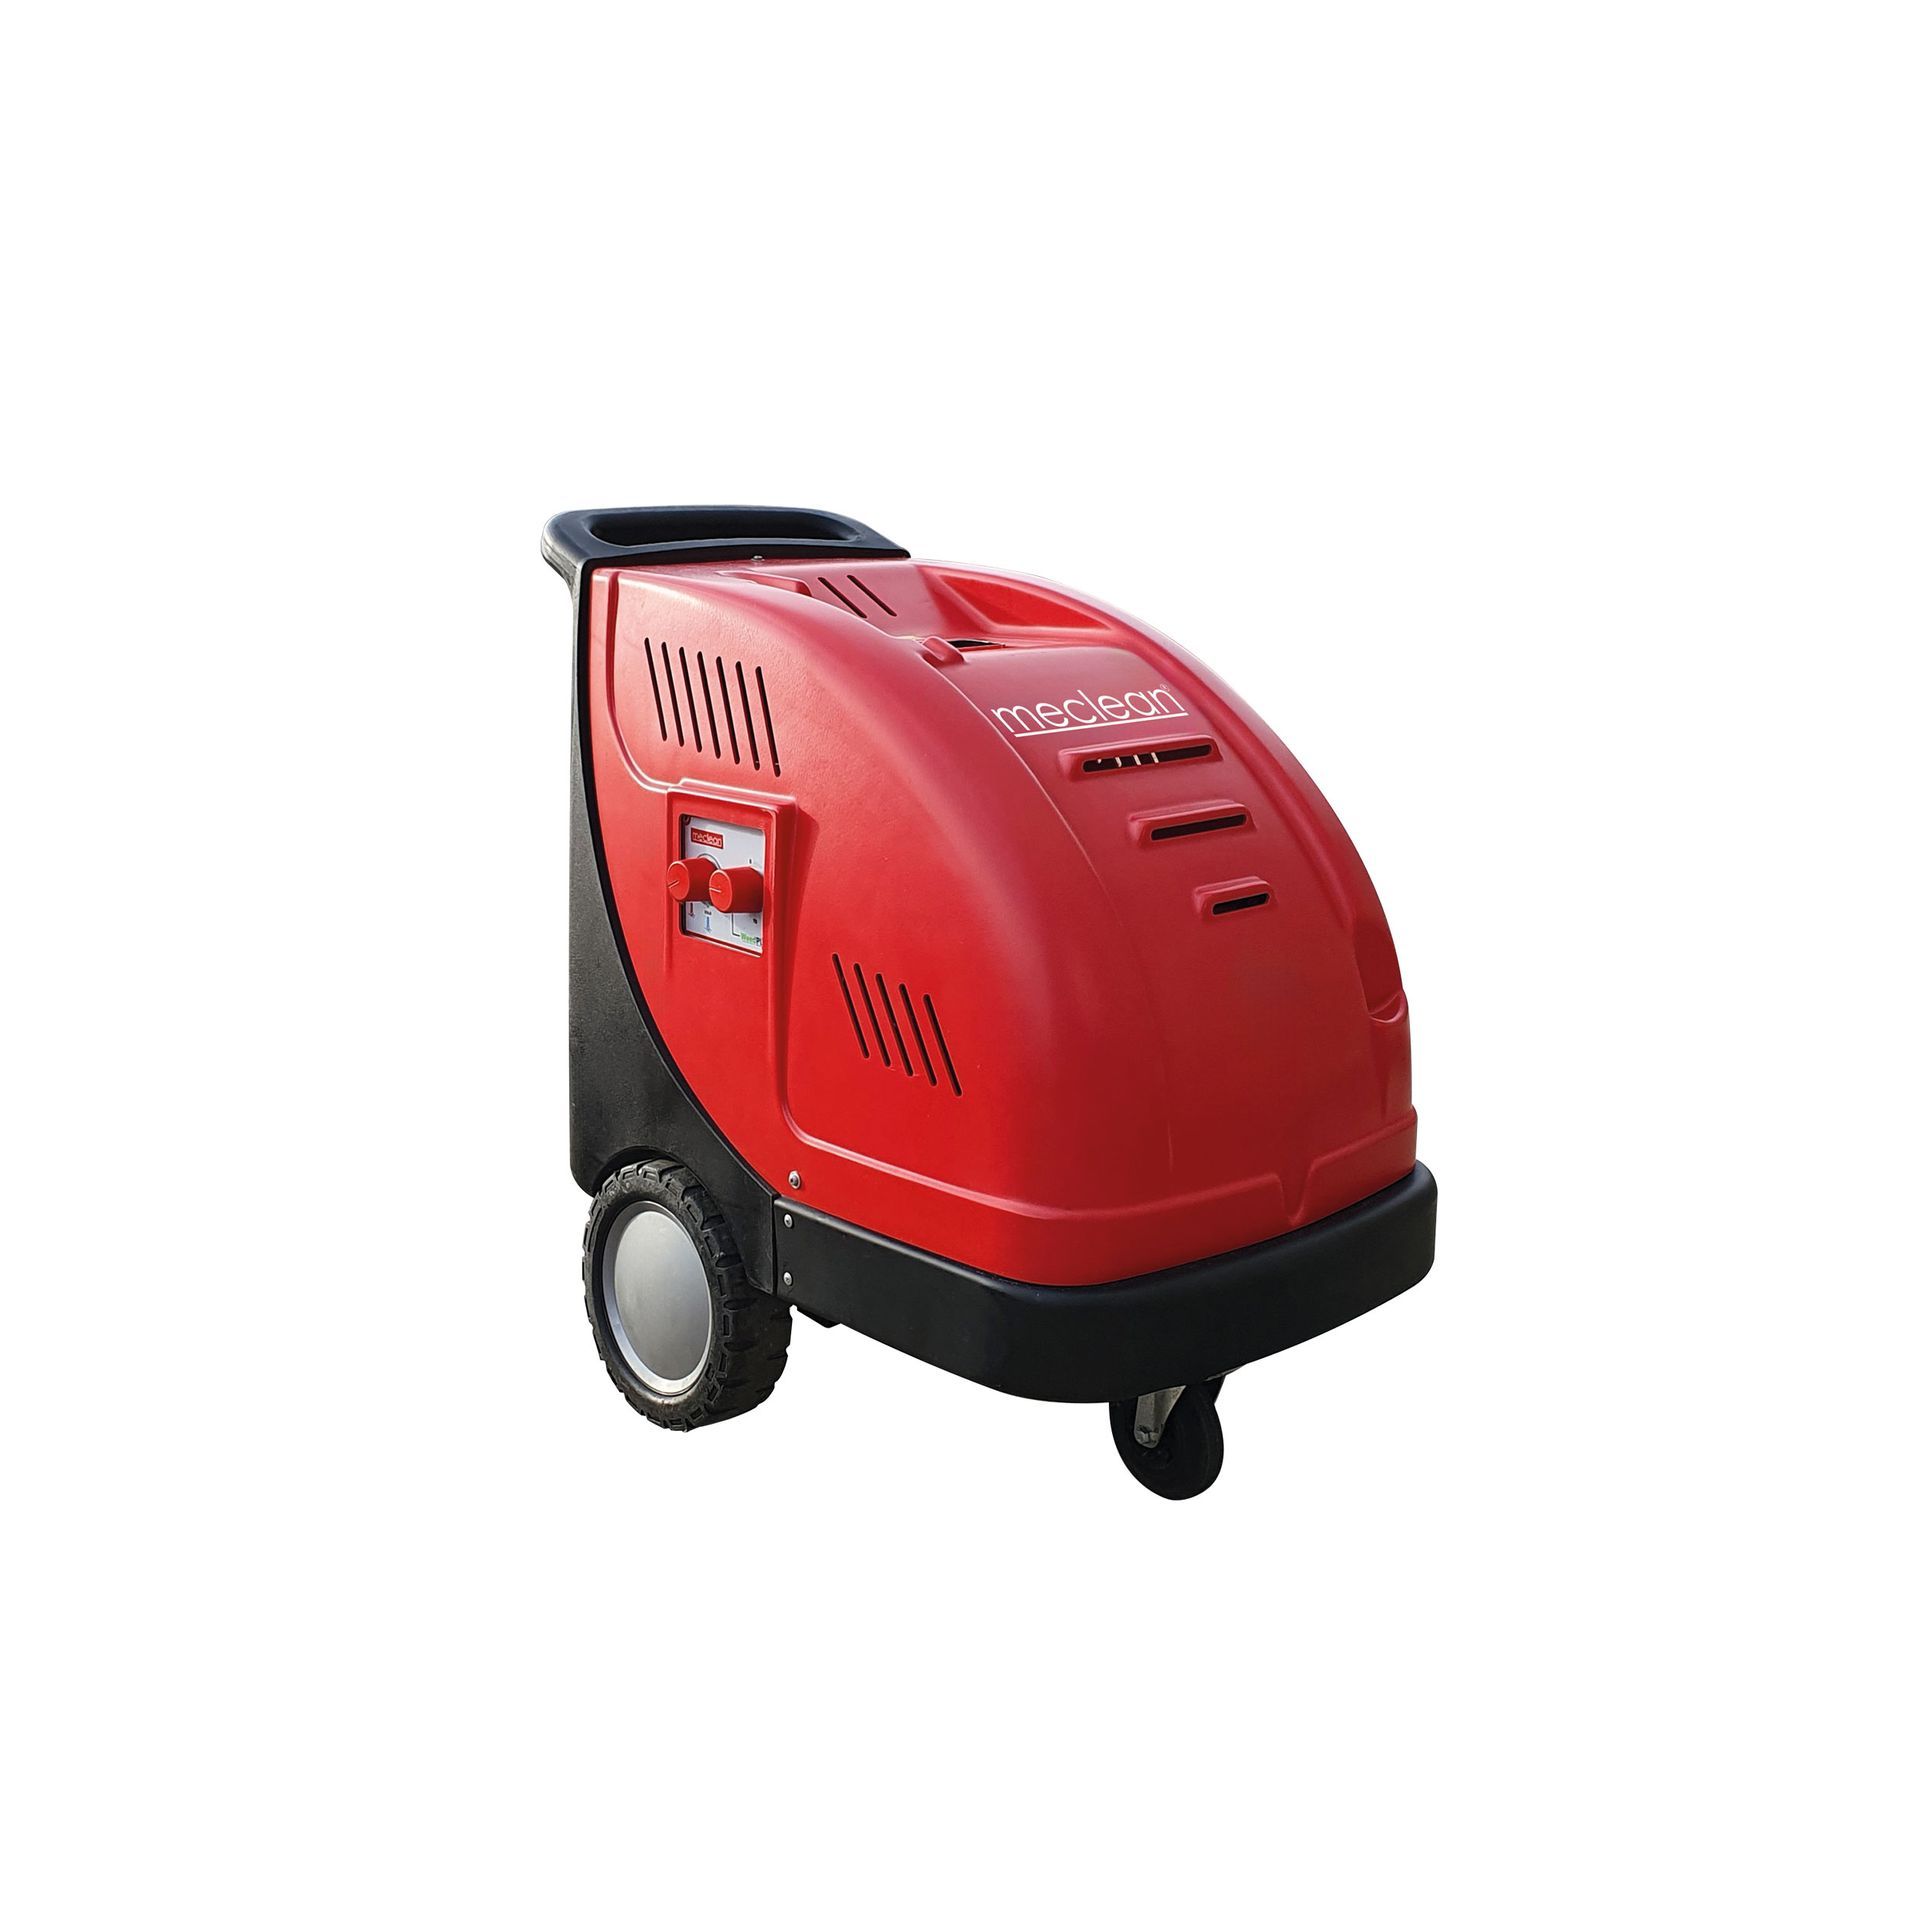 Meclean professional hot water high pressure washer SERIE-B 120/8 with WeedPLUS